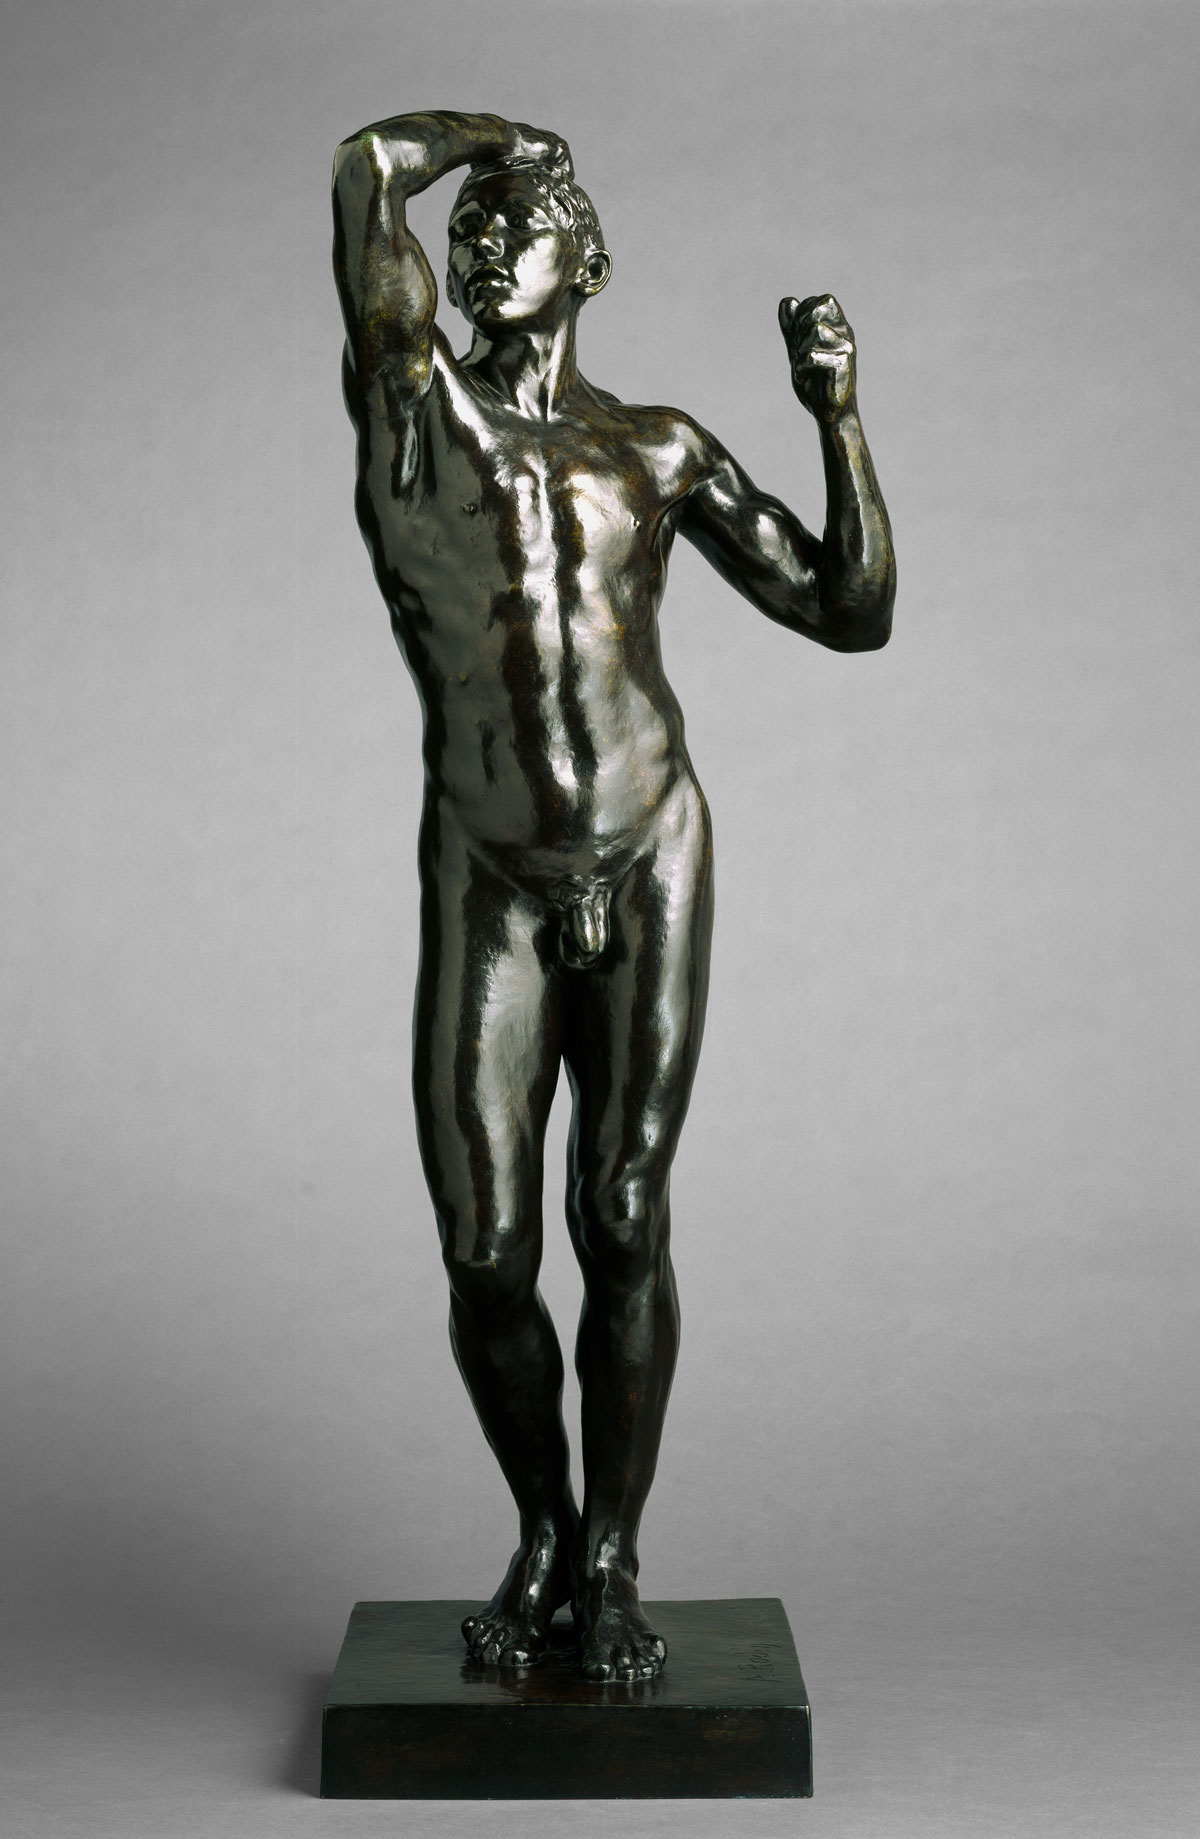 Bronze sculpture of a naked man with one arm resting on his head